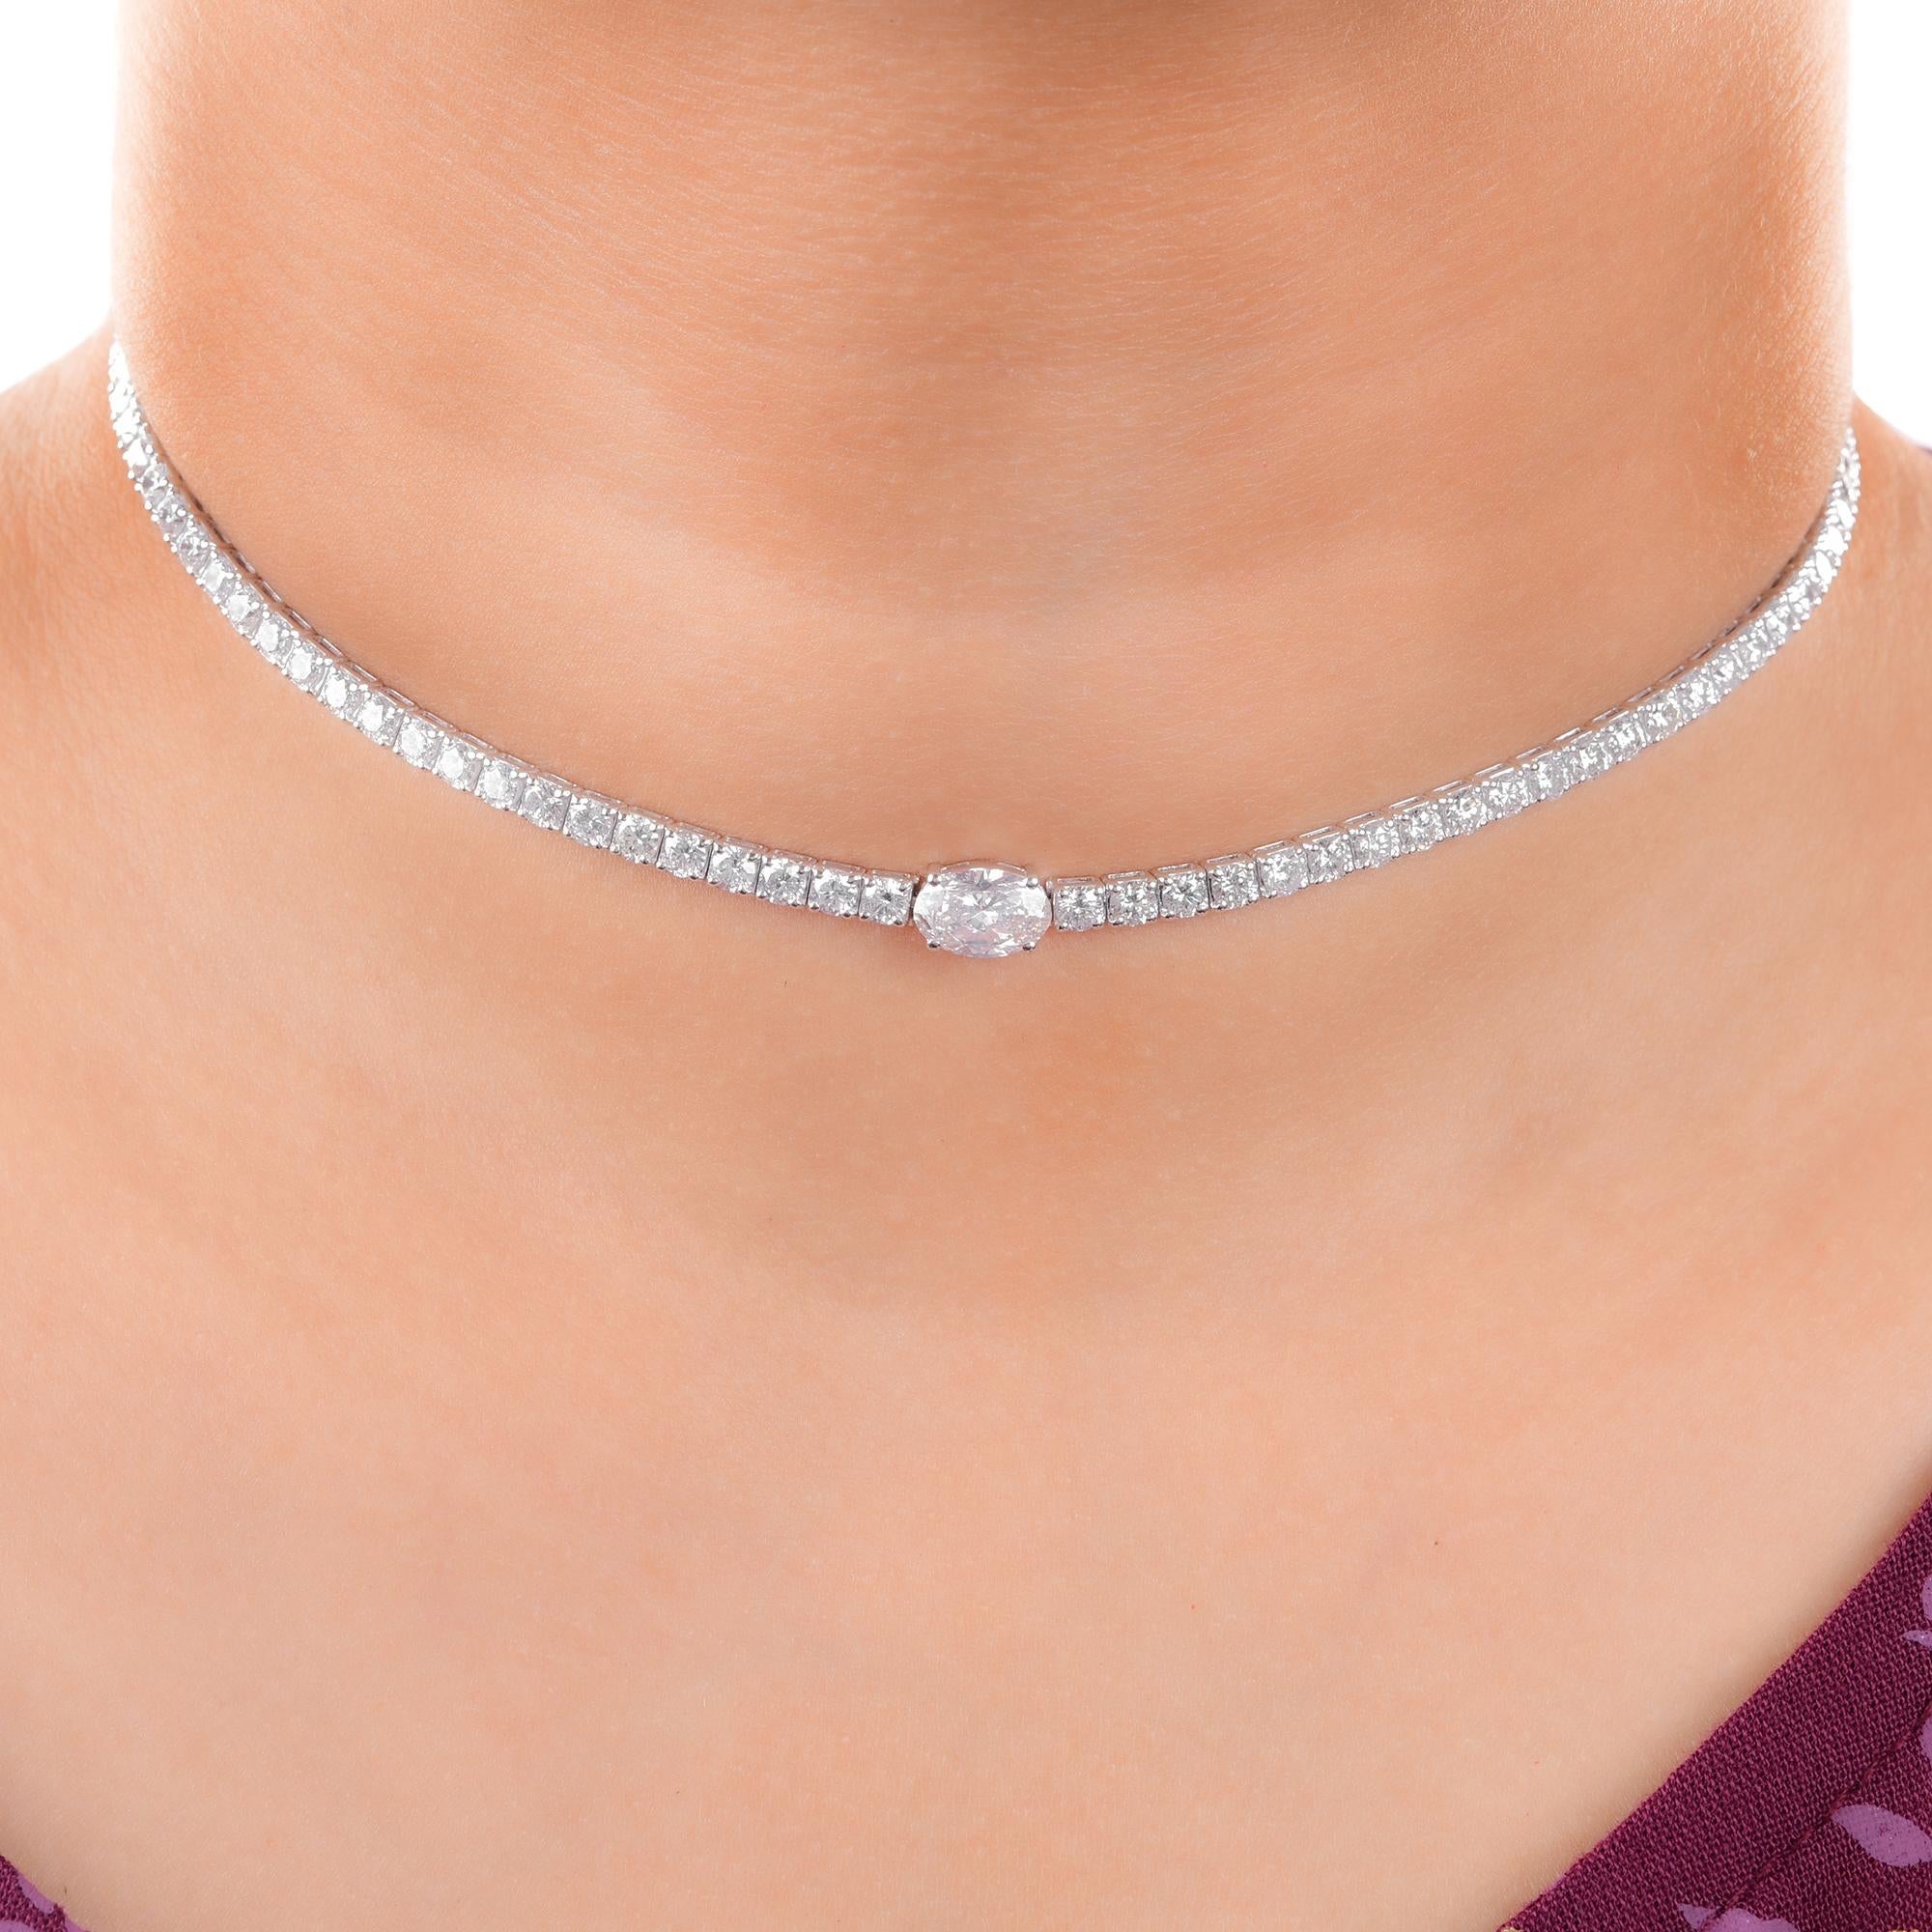 Introducing a breathtaking addition to your jewelry collection: the new natural 9.25 carat oval and round diamond choker necklace, expertly crafted in exquisite 14 karat white gold. This magnificent piece of fine jewelry is a testament to